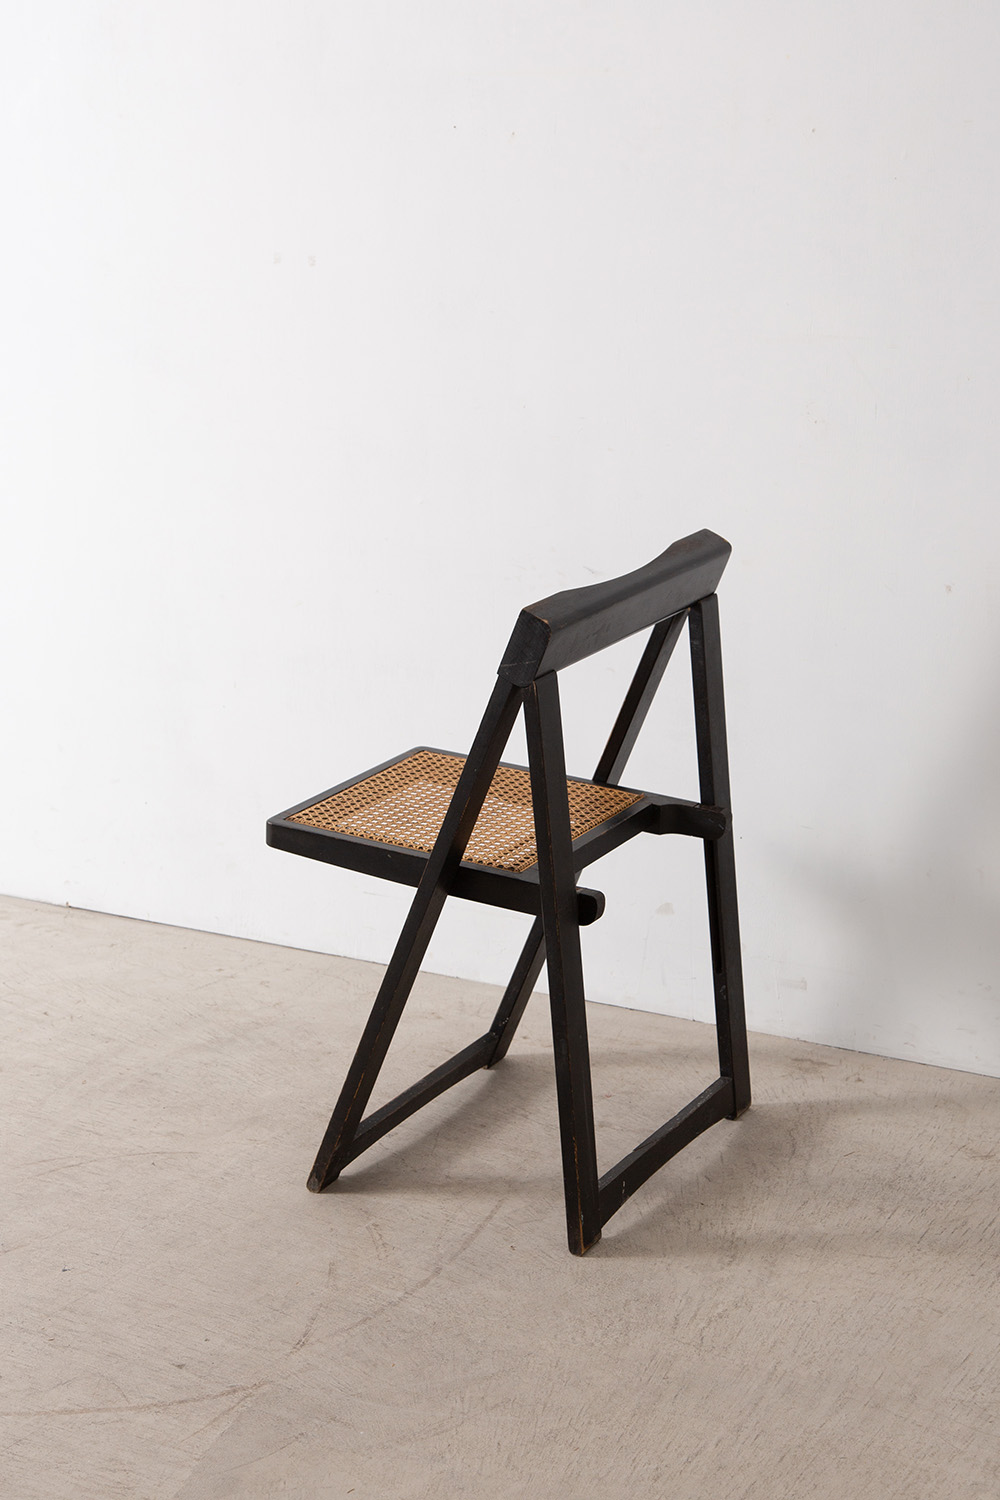 stoop | Folding Chair by Aldo Jacober for Alberto Bazzani in Wood 